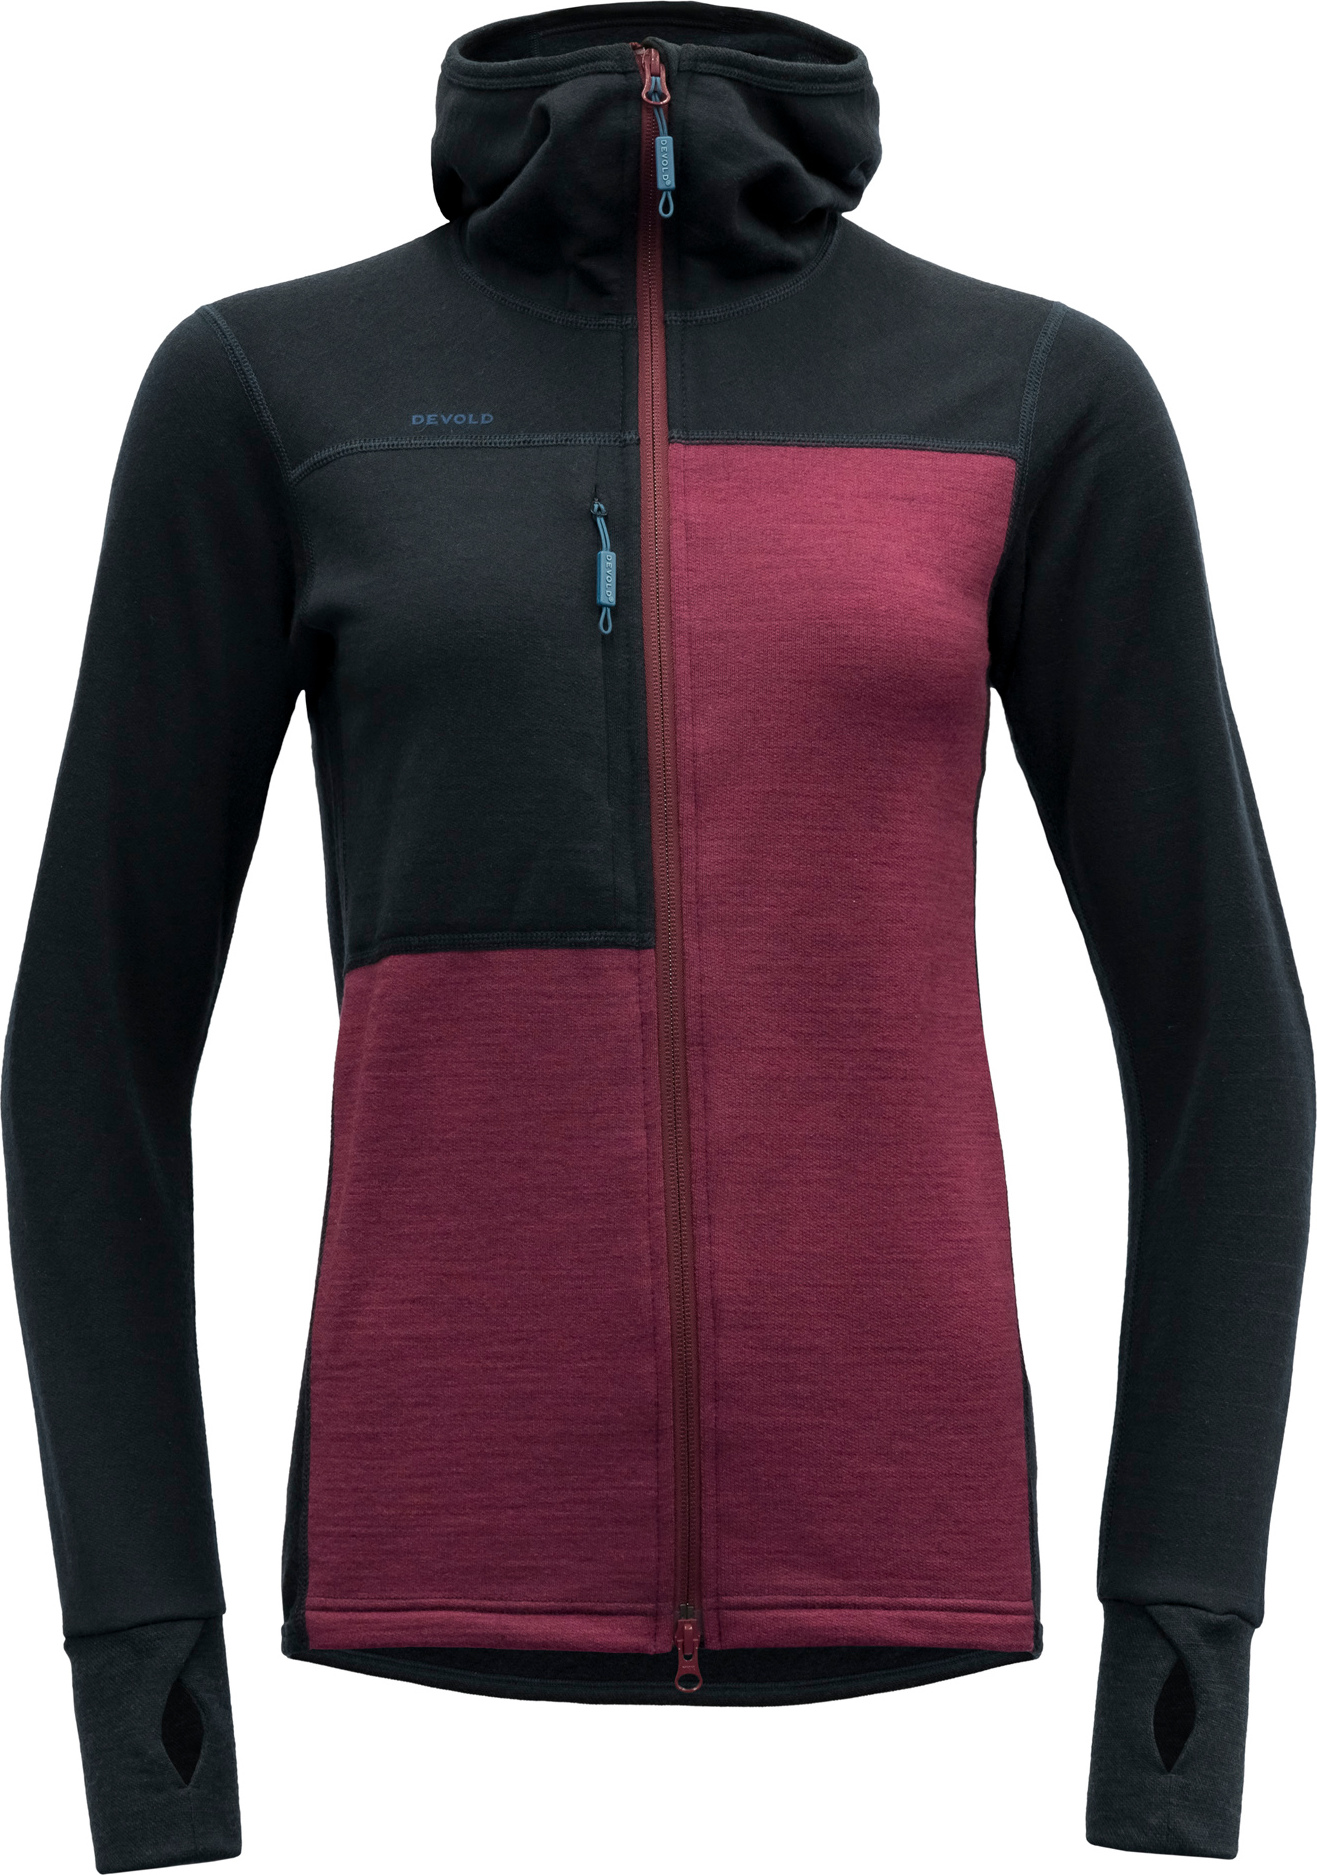 Women’s Nibba Hiking Jacket With Hood INK/BEETROOT